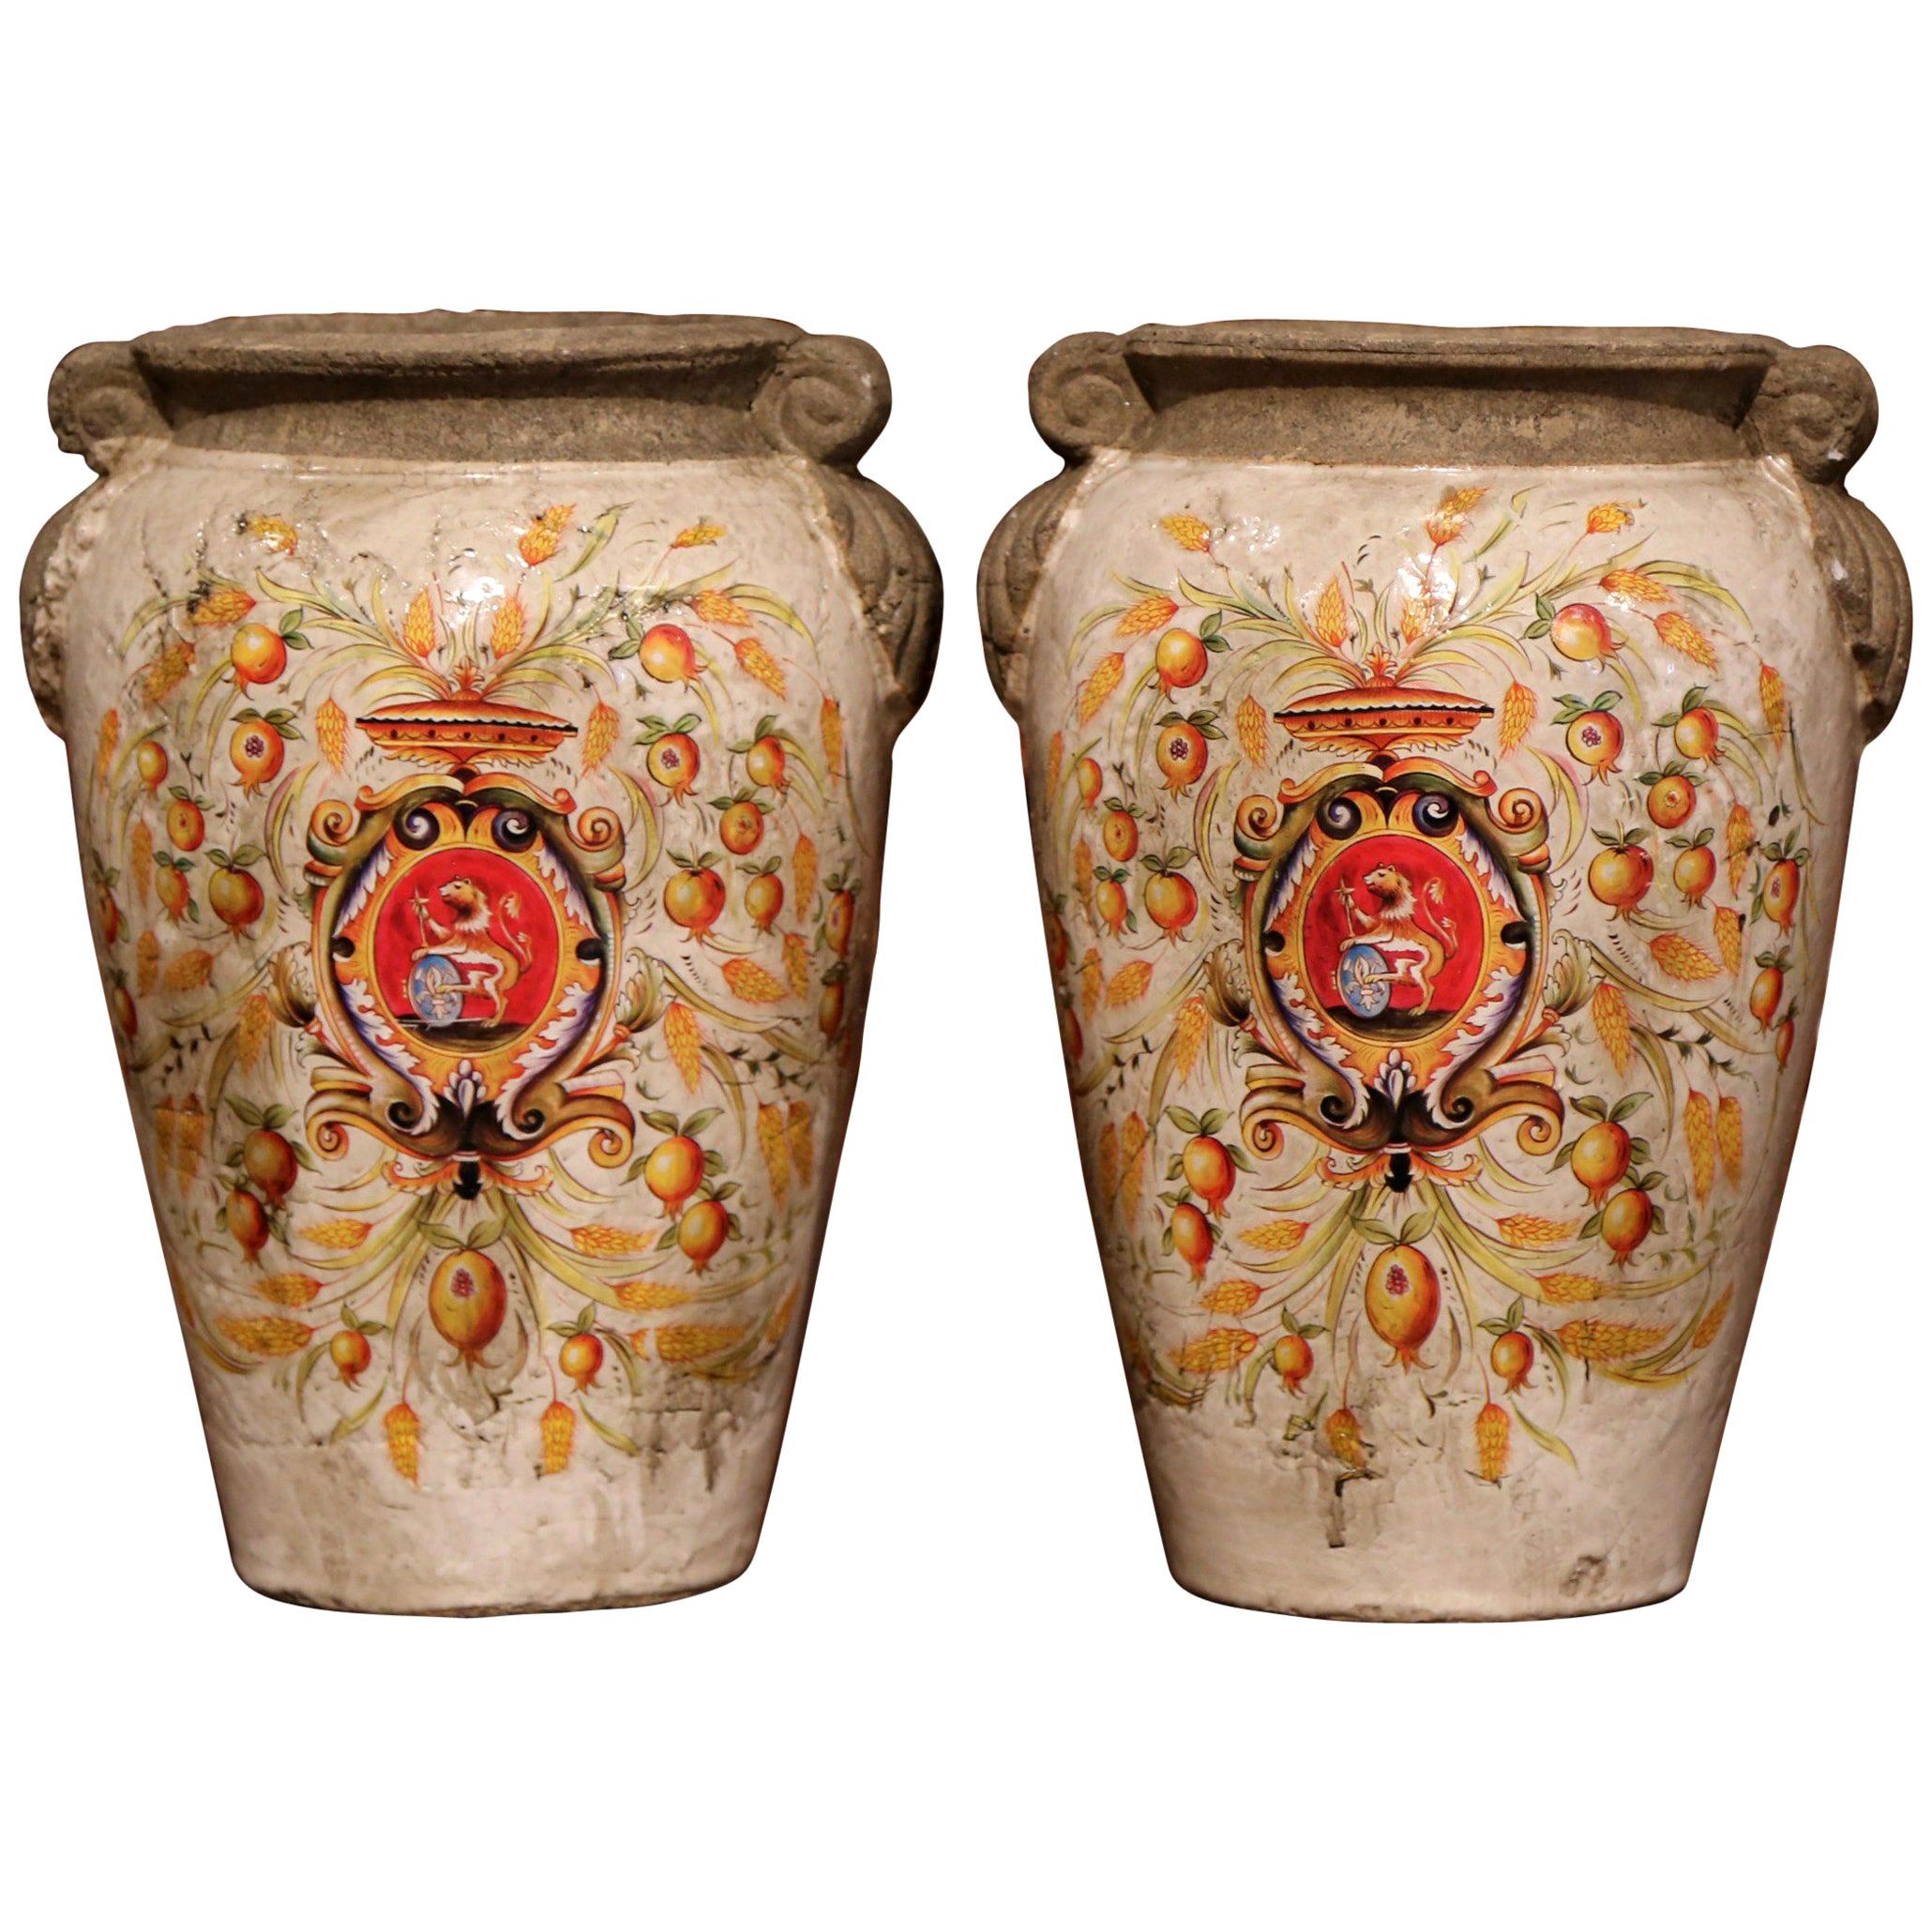 Pair of Italian Hand Painted Ceramic Vases with Wheat and Fruit Decor